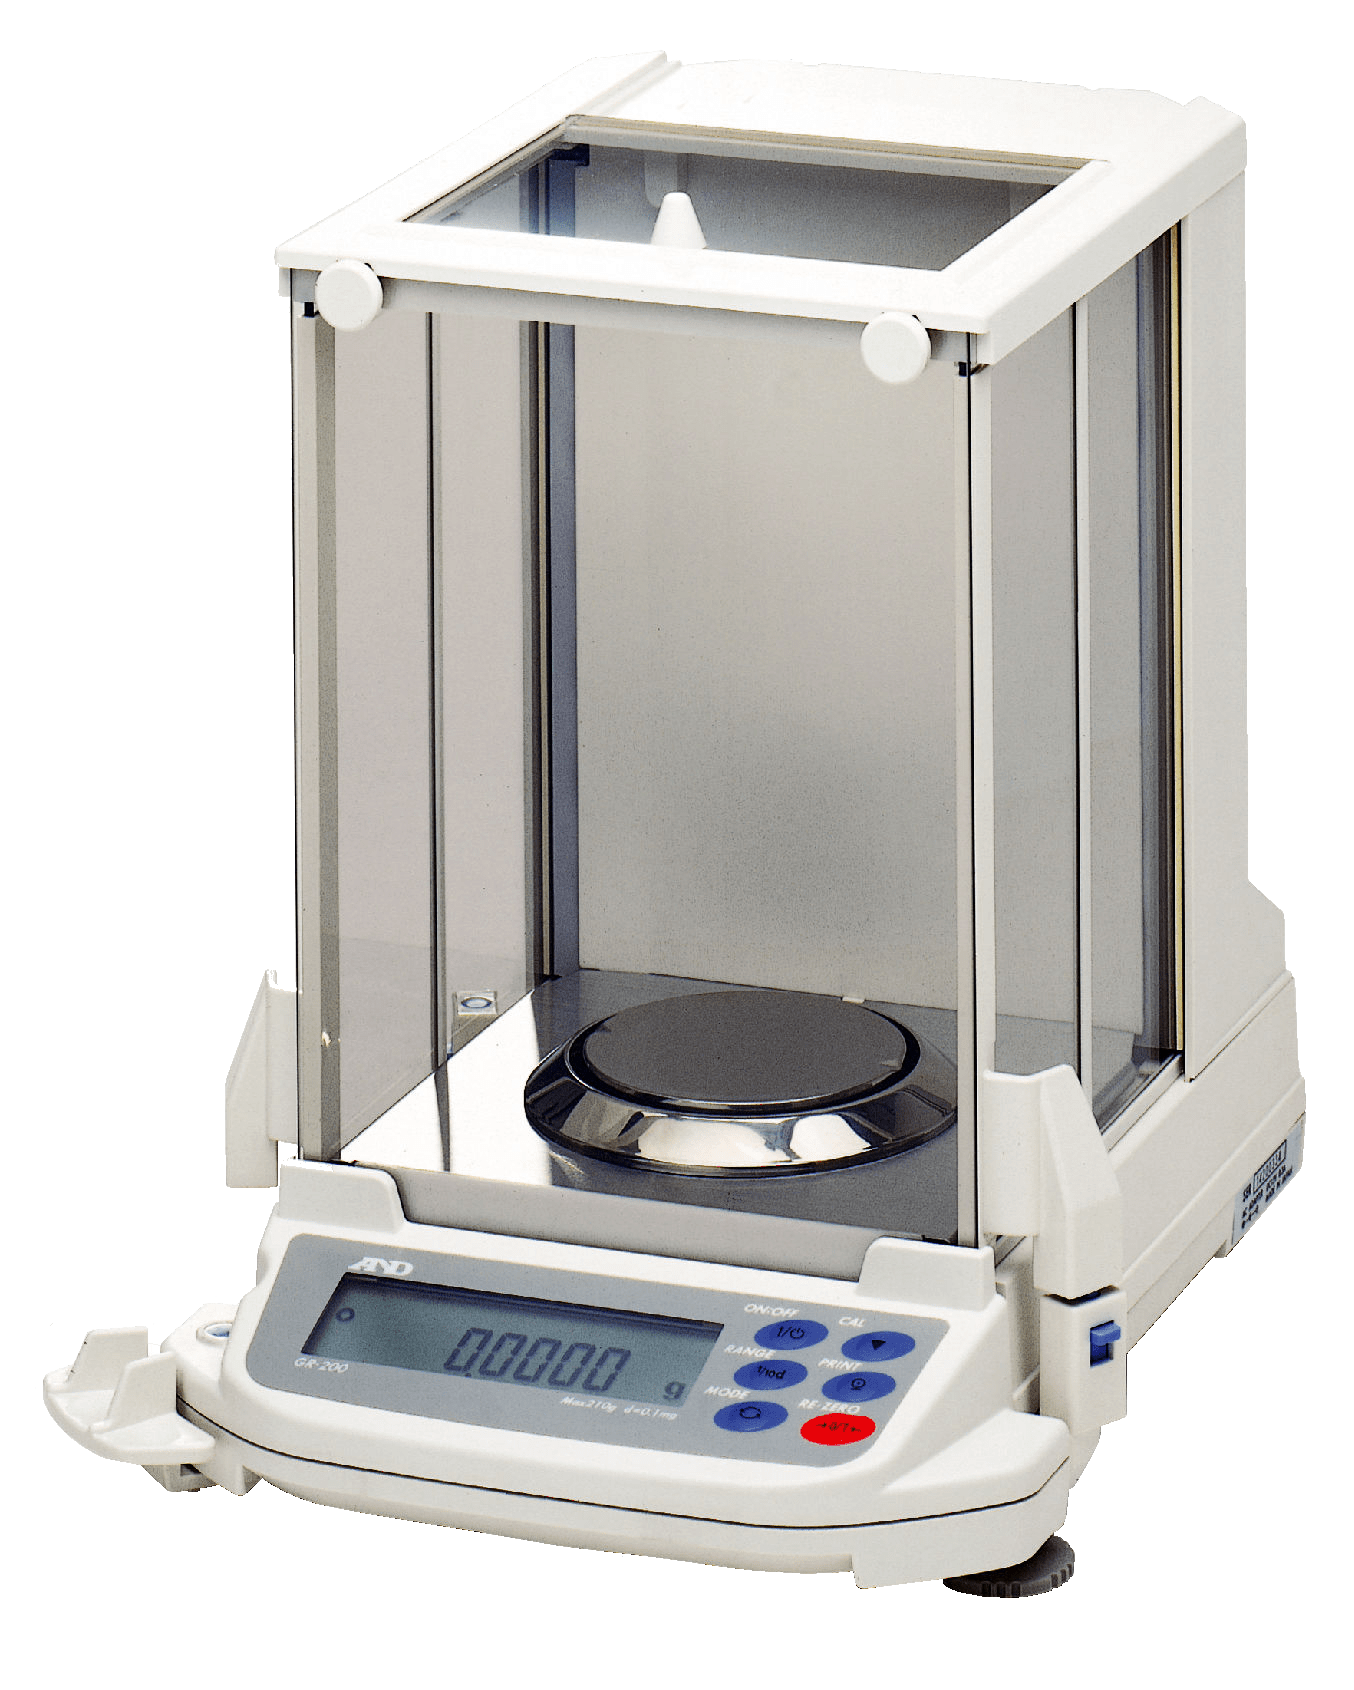 A And D GR-202 analytical balance with digital display and six raised multipurpose buttons